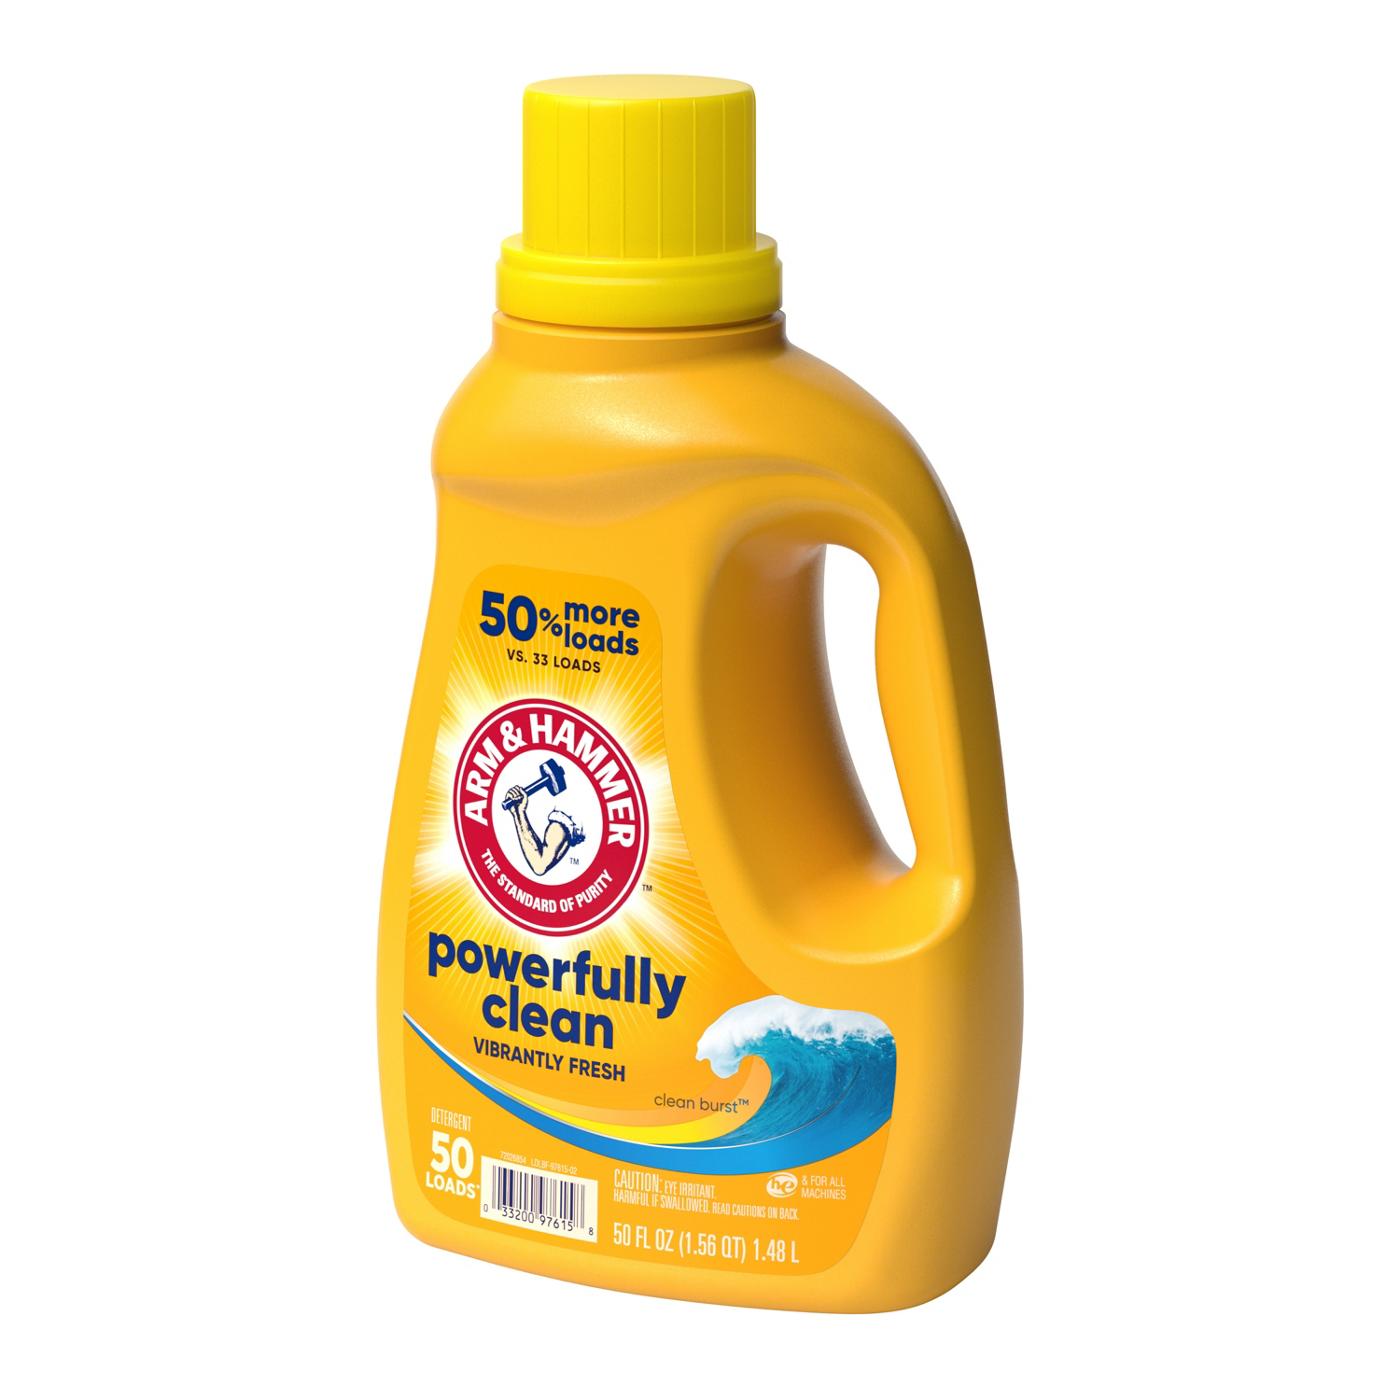 Arm & Hammer Powerfully Clean HE Liquid Laundry Detergent, 50 Loads - Clean Burst; image 2 of 4